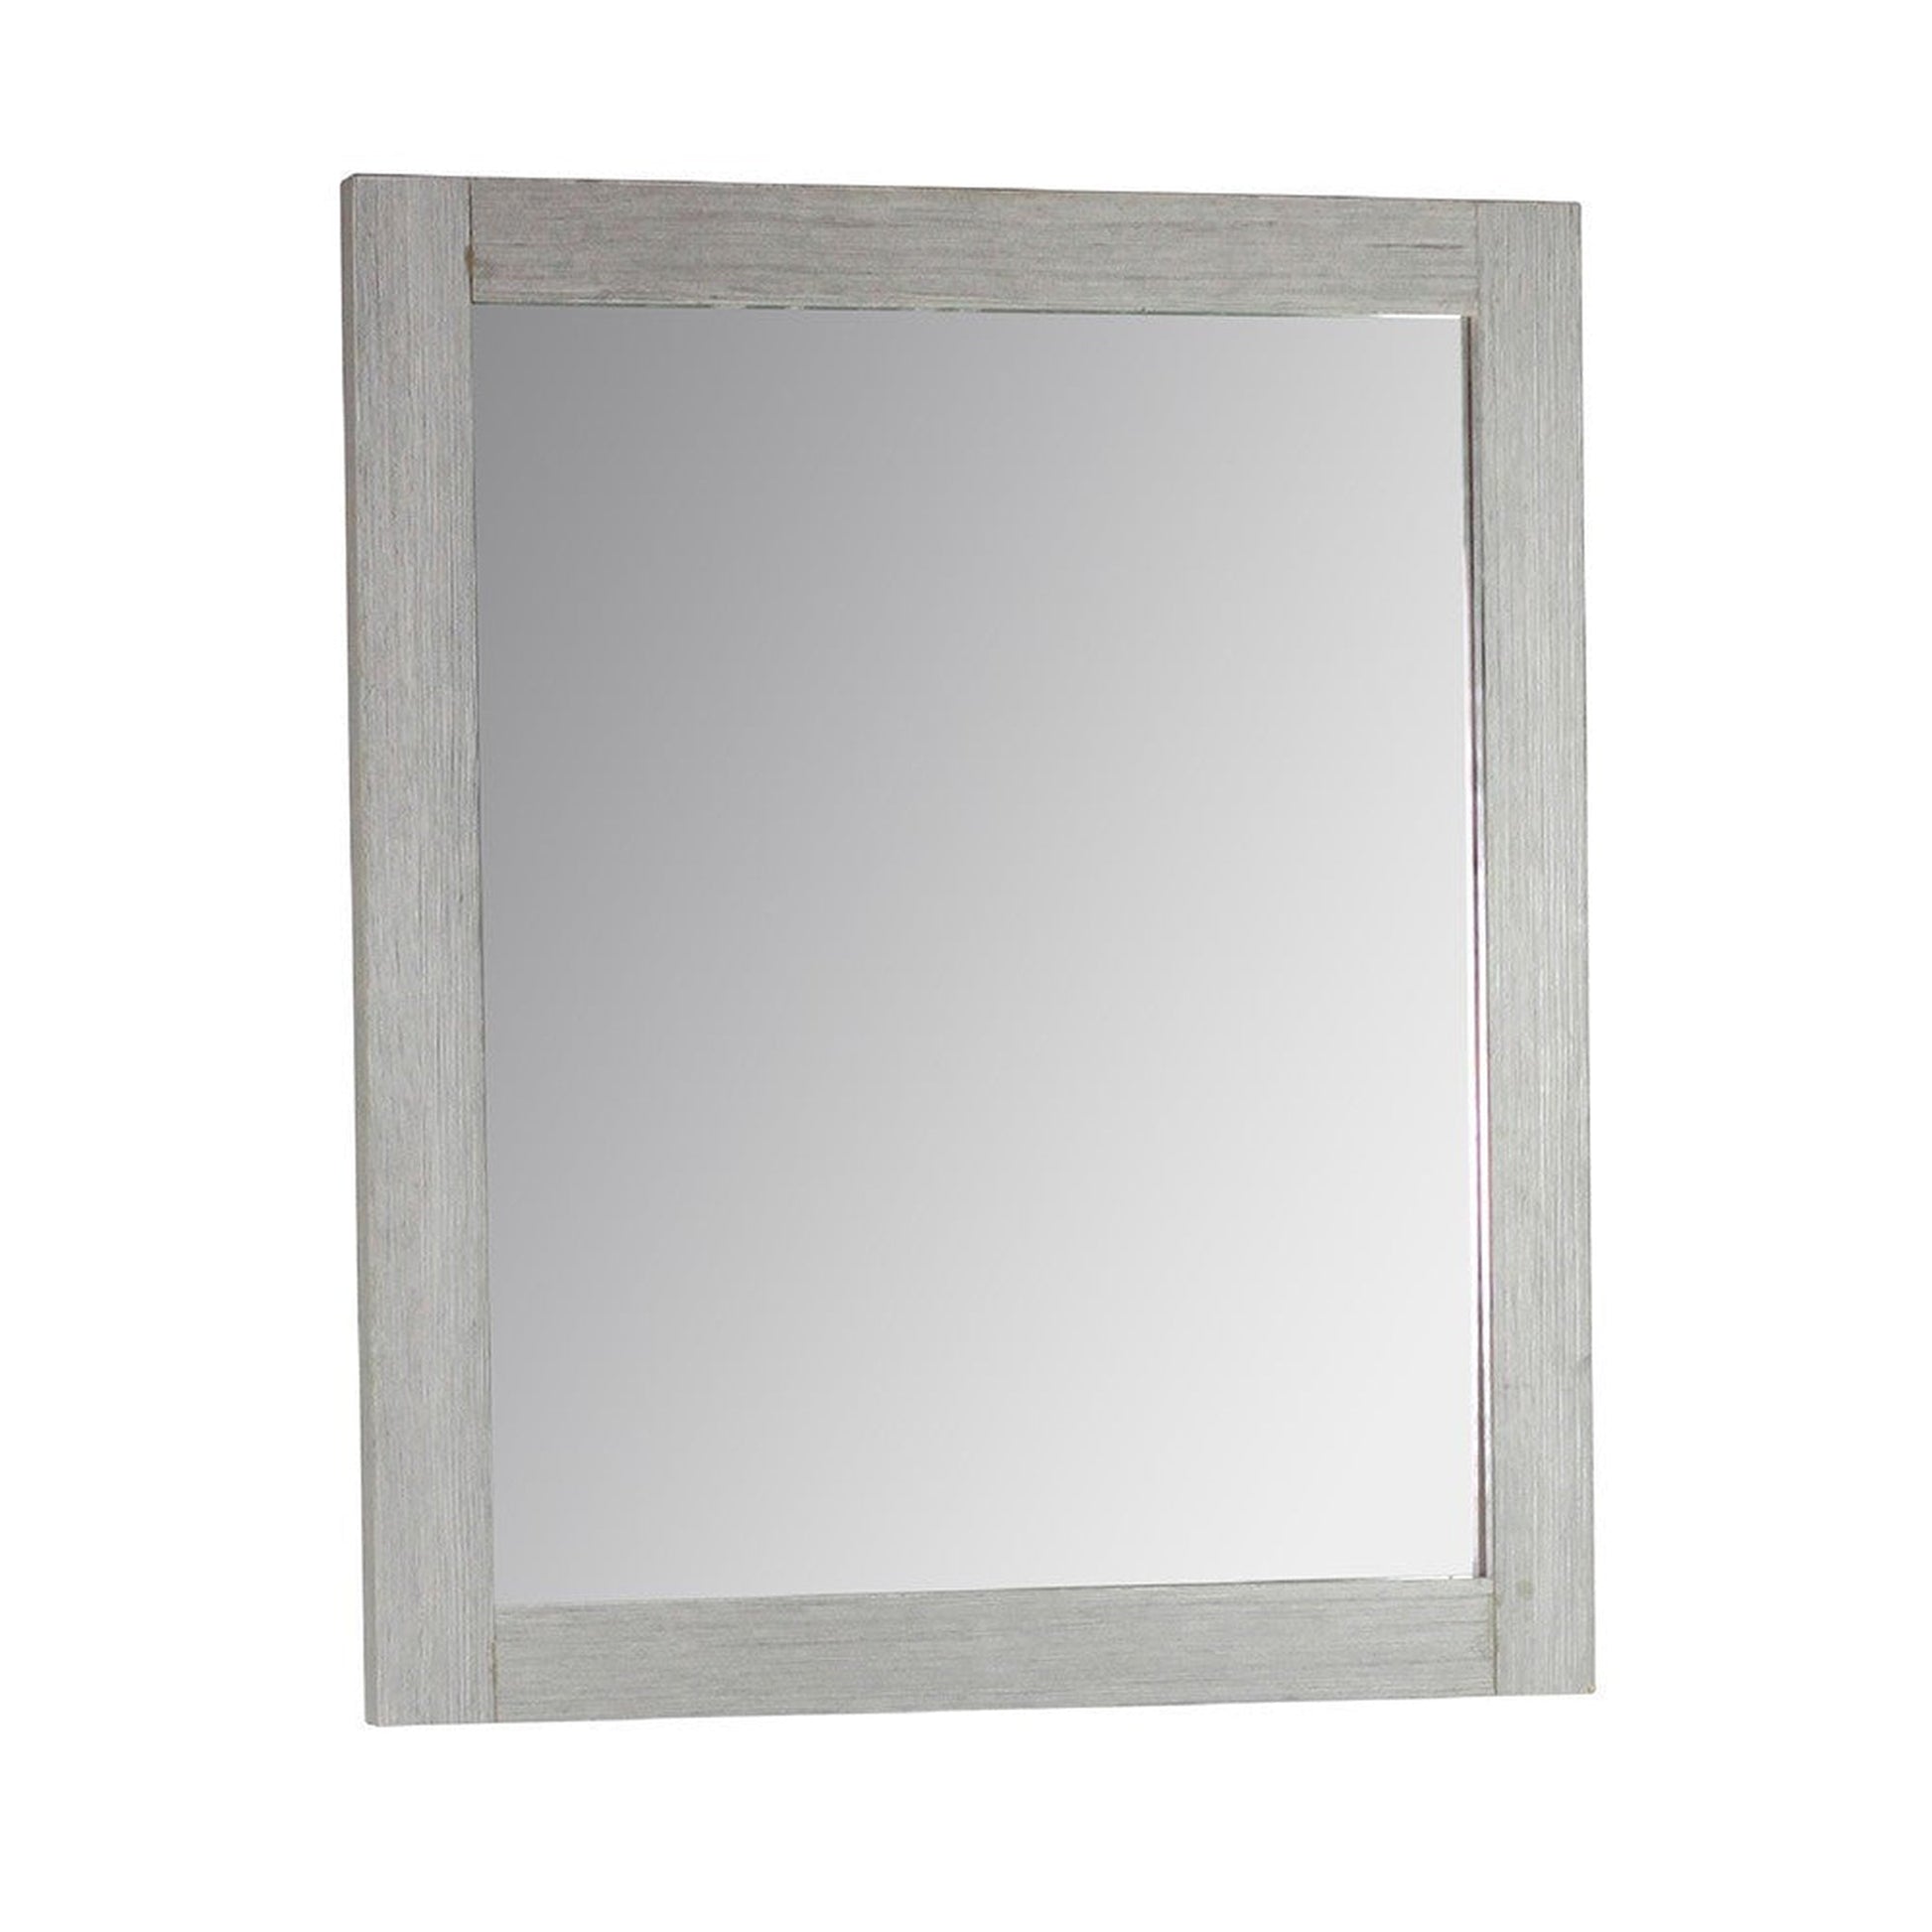 Bellaterra Home 24" x 30" Gray Pine Rectangle Wall-Mounted Solid Wood Framed Mirror